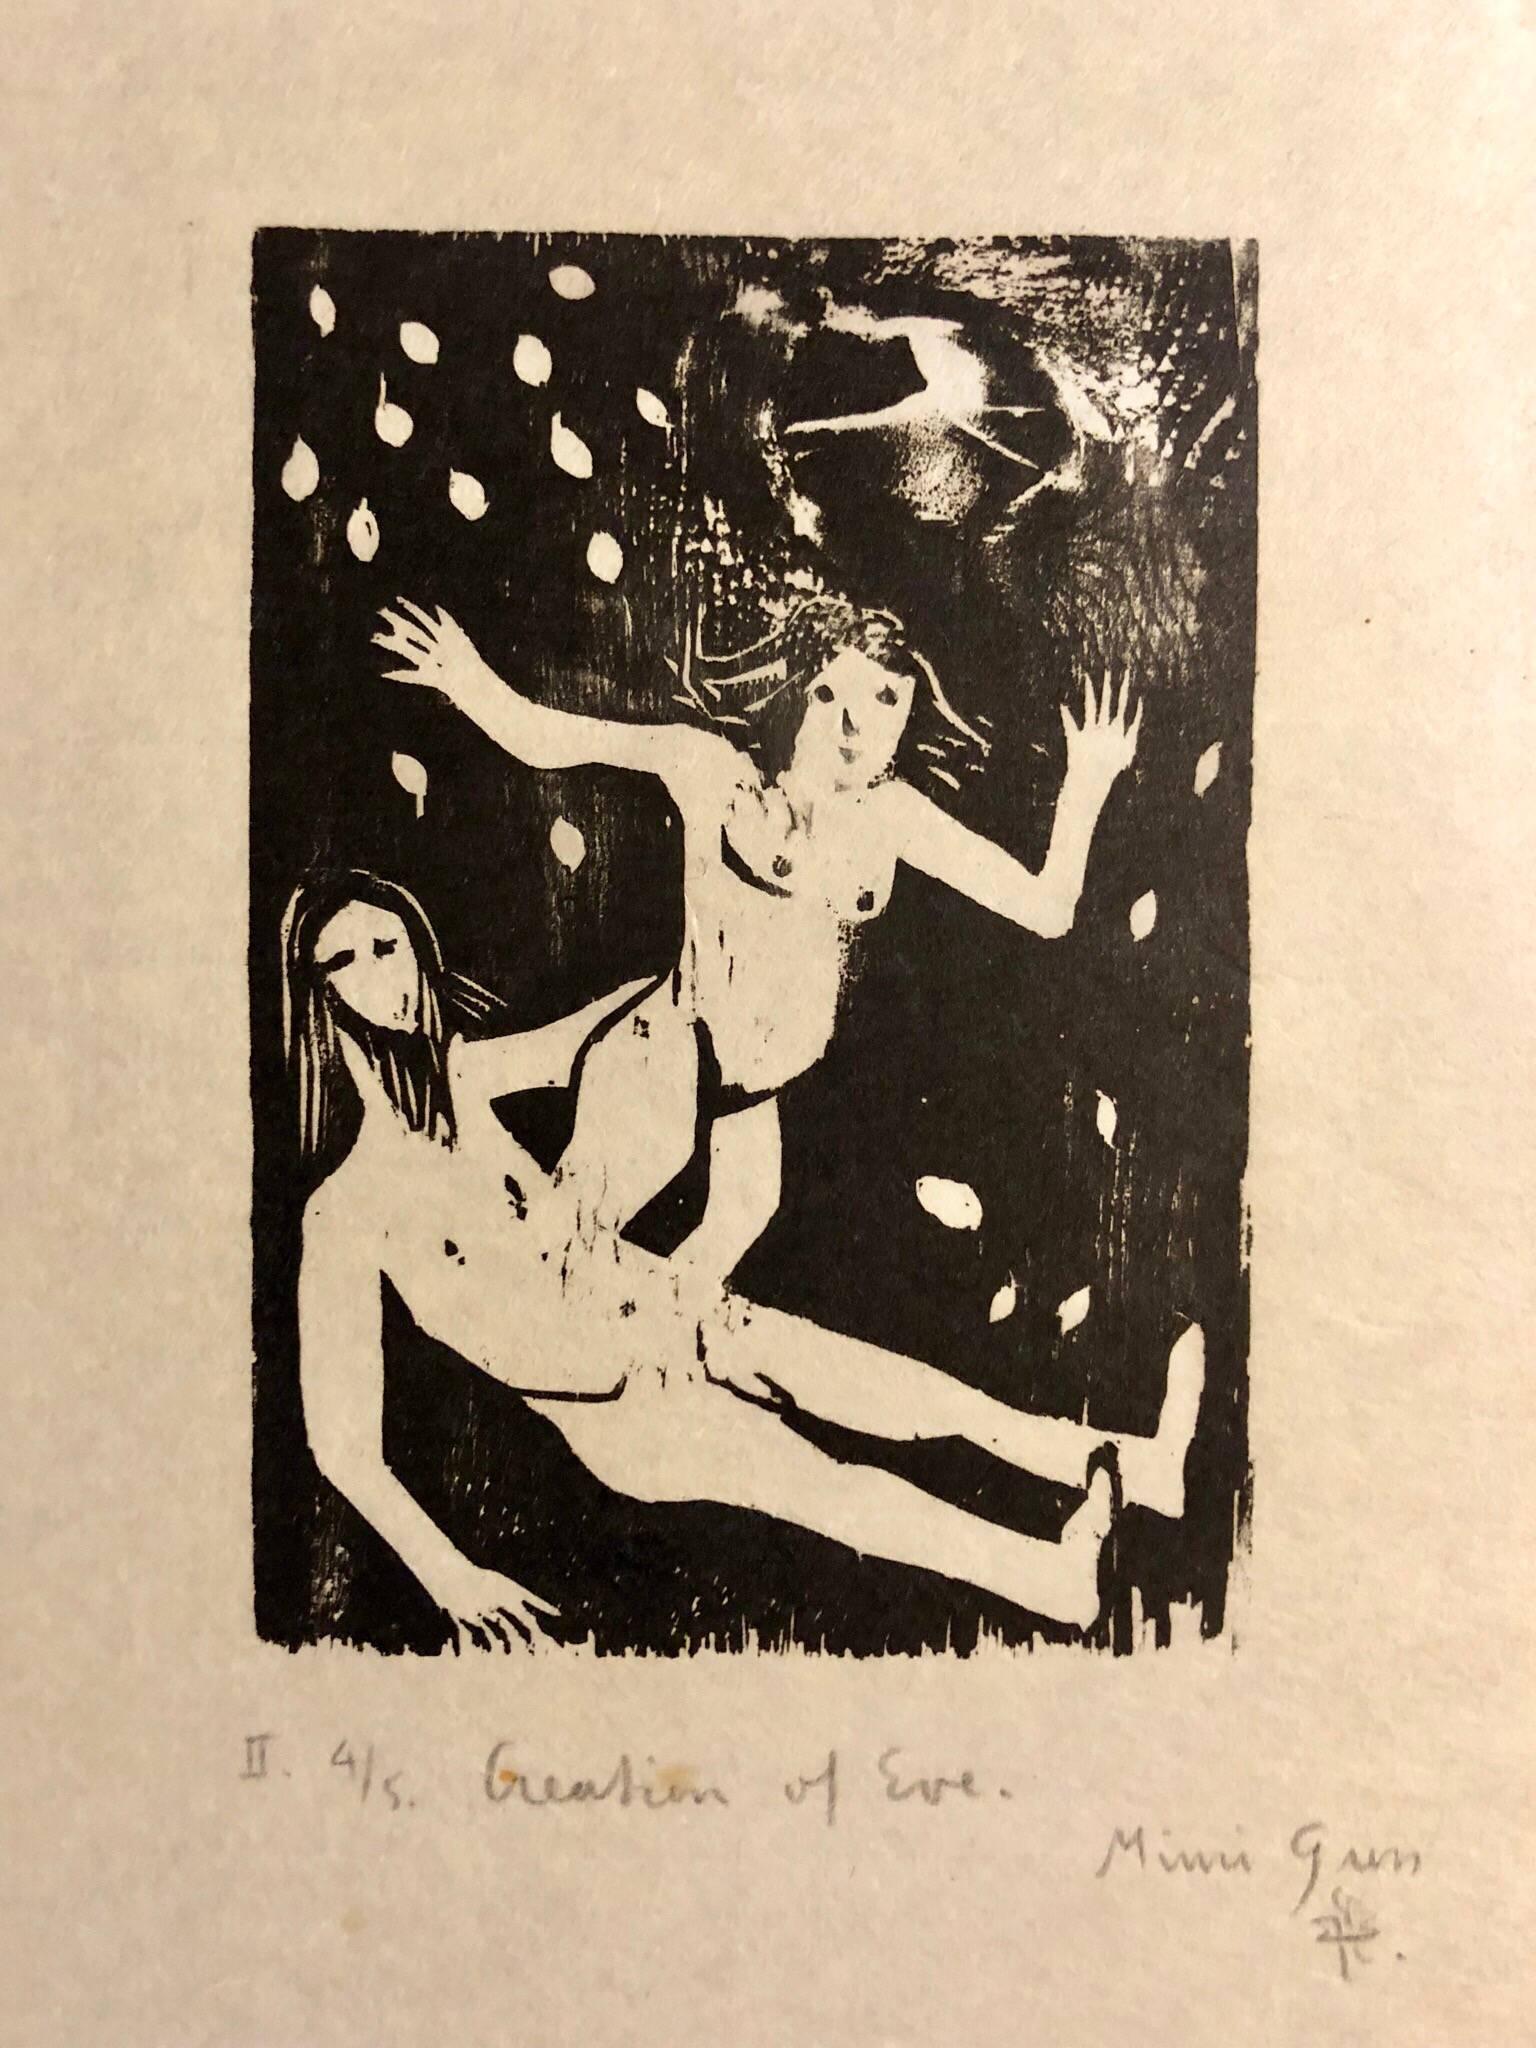 Mimi Gross Nude Print - Woodcut Print, 'Creation of Eve' Bible Scene Signed Small Edition 